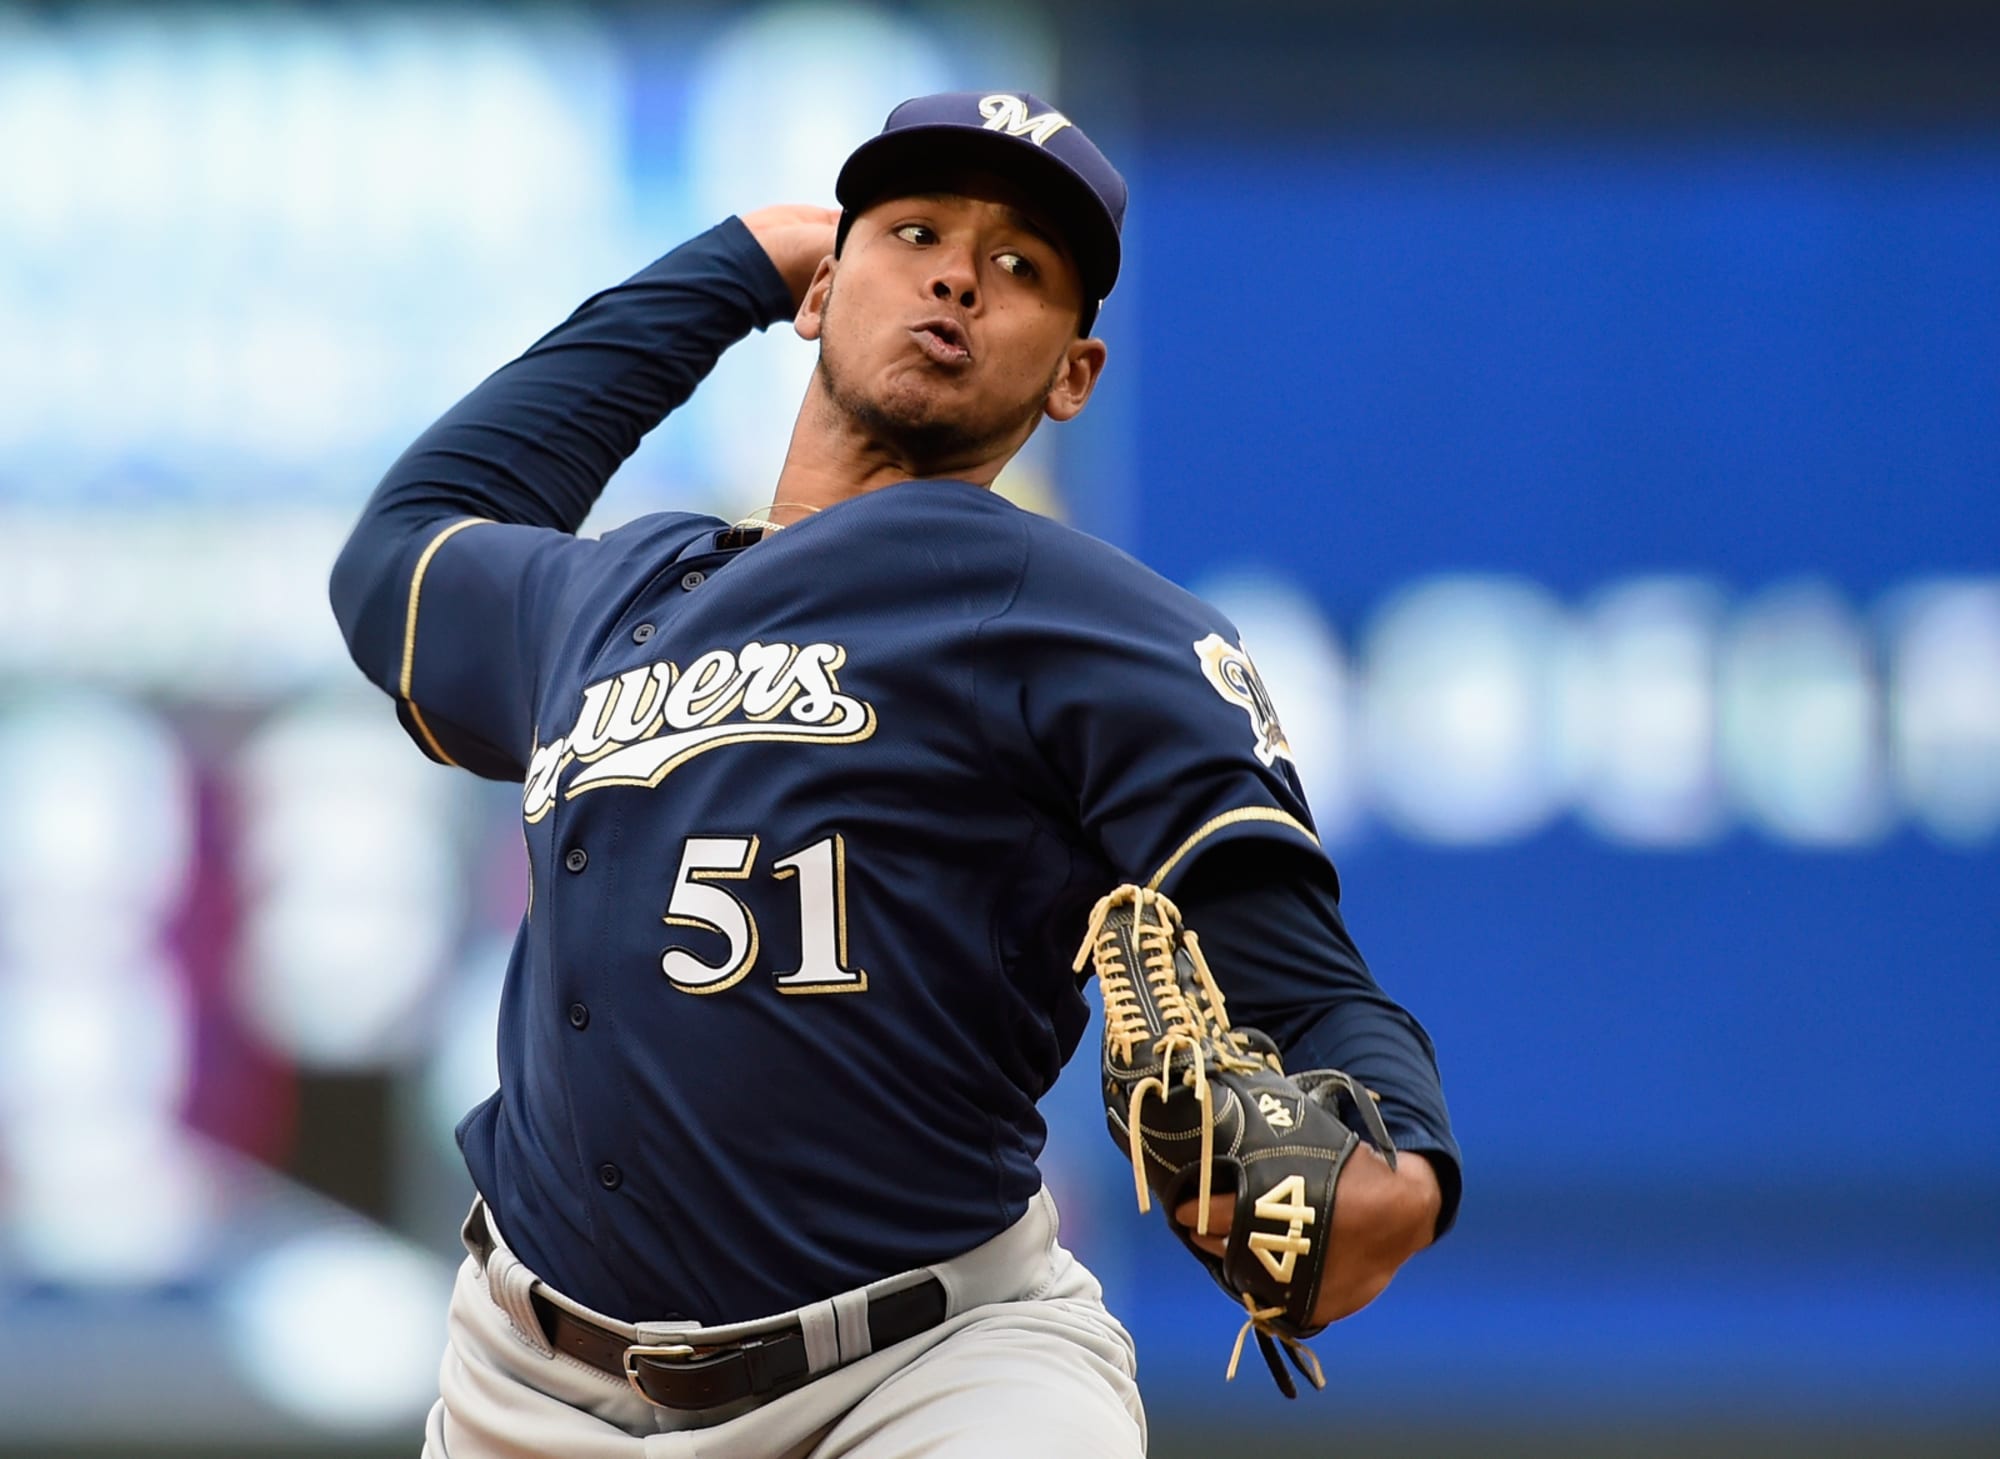 Brewers Pitcher FREDDY PERALTA Signed 8x10 Photo #2 AUTO - MLB Debut 13  K's!!